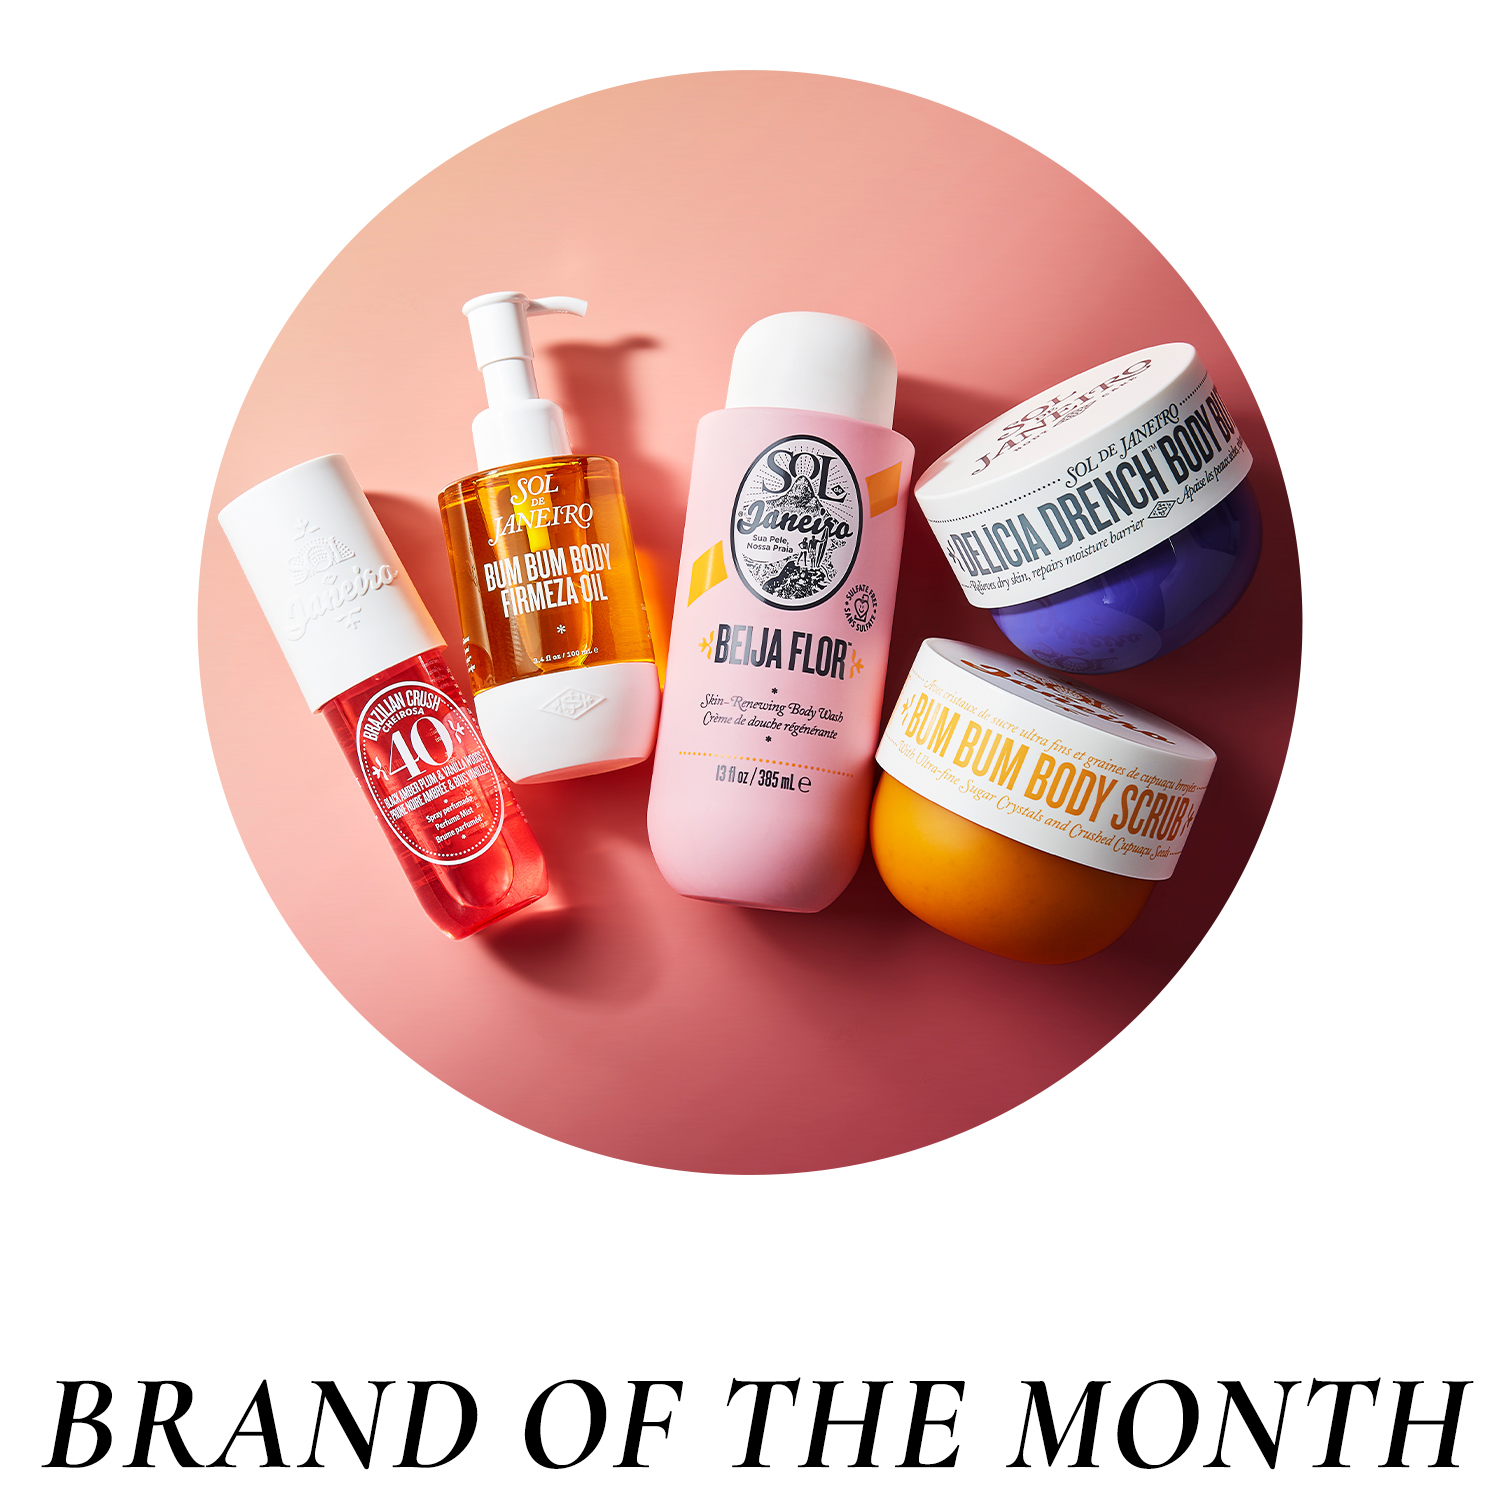 Brand of the month